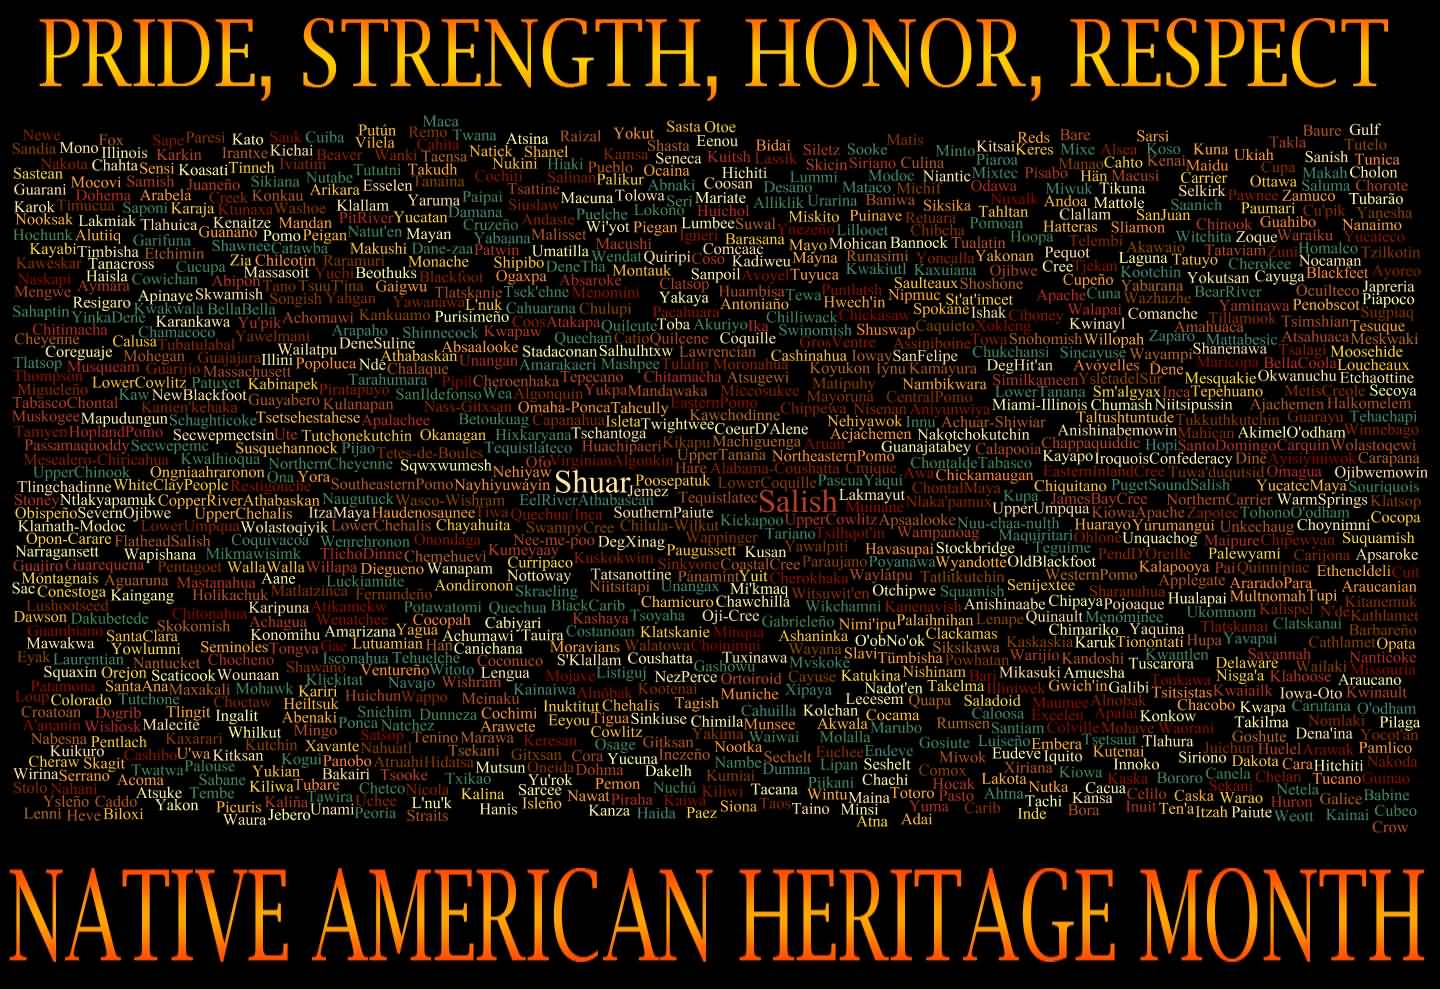 Pride, Strength, Honor, Respect Native American Heritage Month